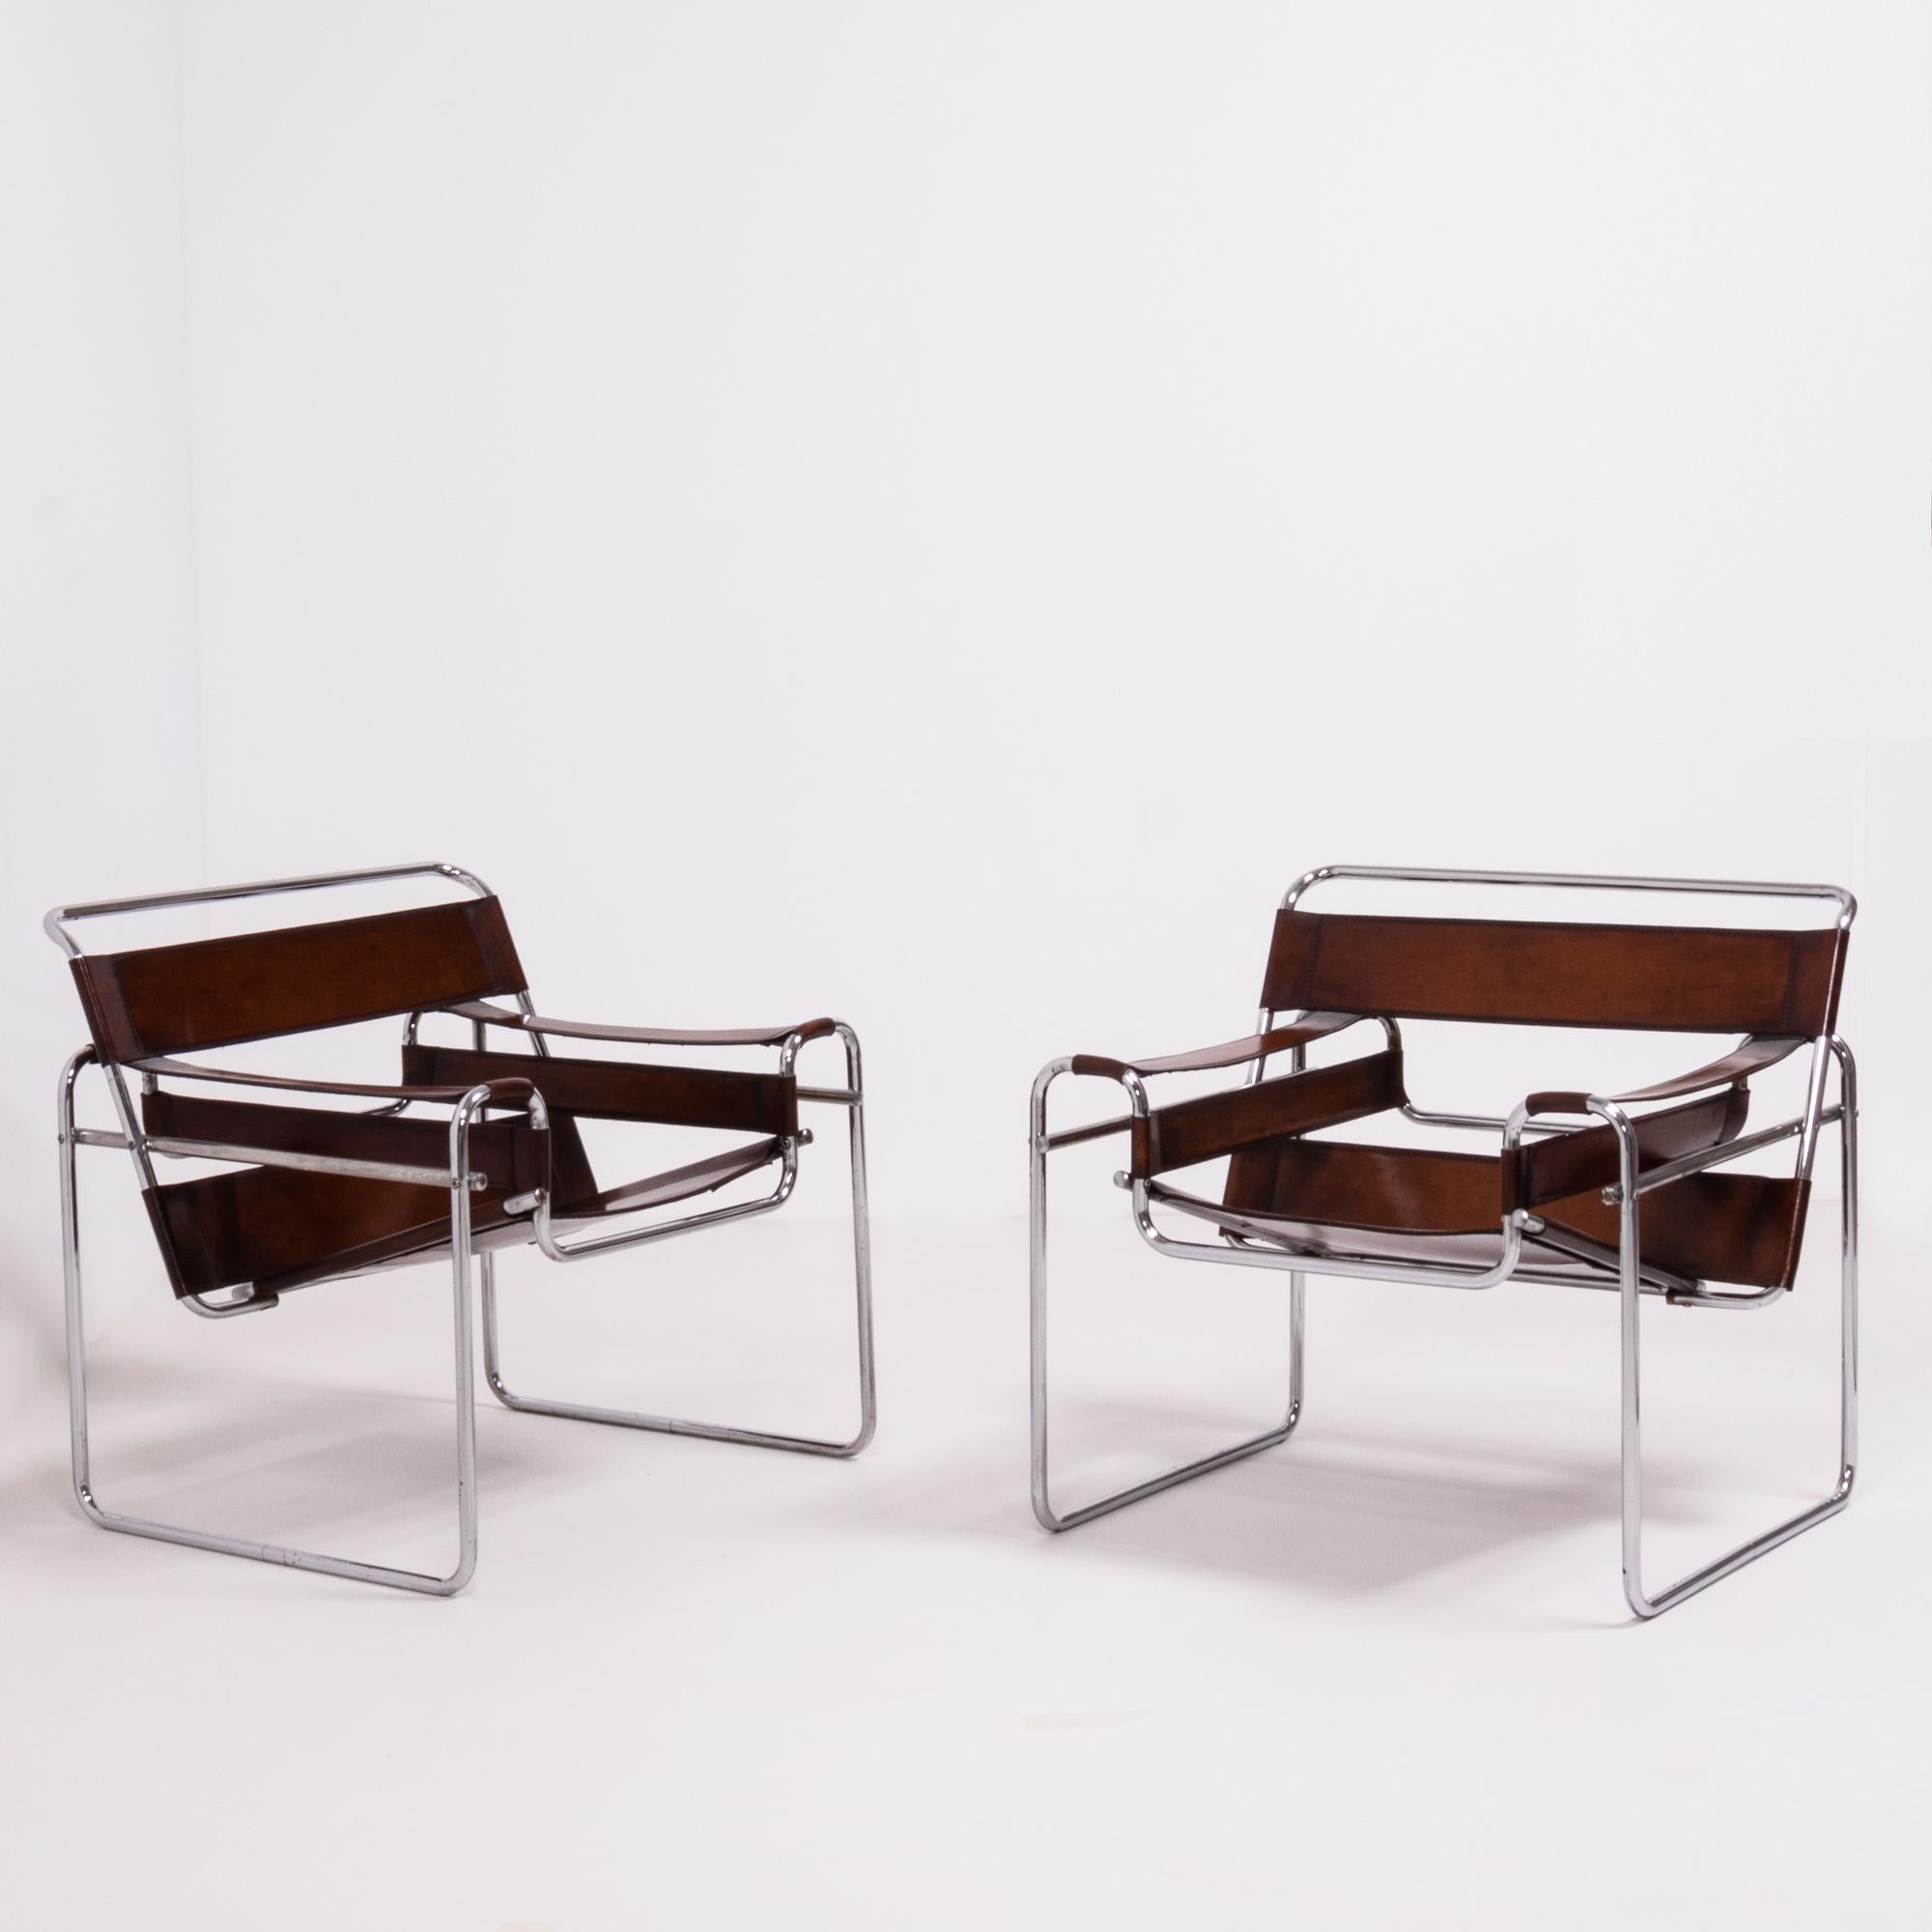 Designed in the style of the iconic Marcel Breuer Wassily, this pair of chairs feature tubular steel frames.

The relaxed angled seats are constructed from a beautiful tan hide with additional panels creating the back and arm rests.
 